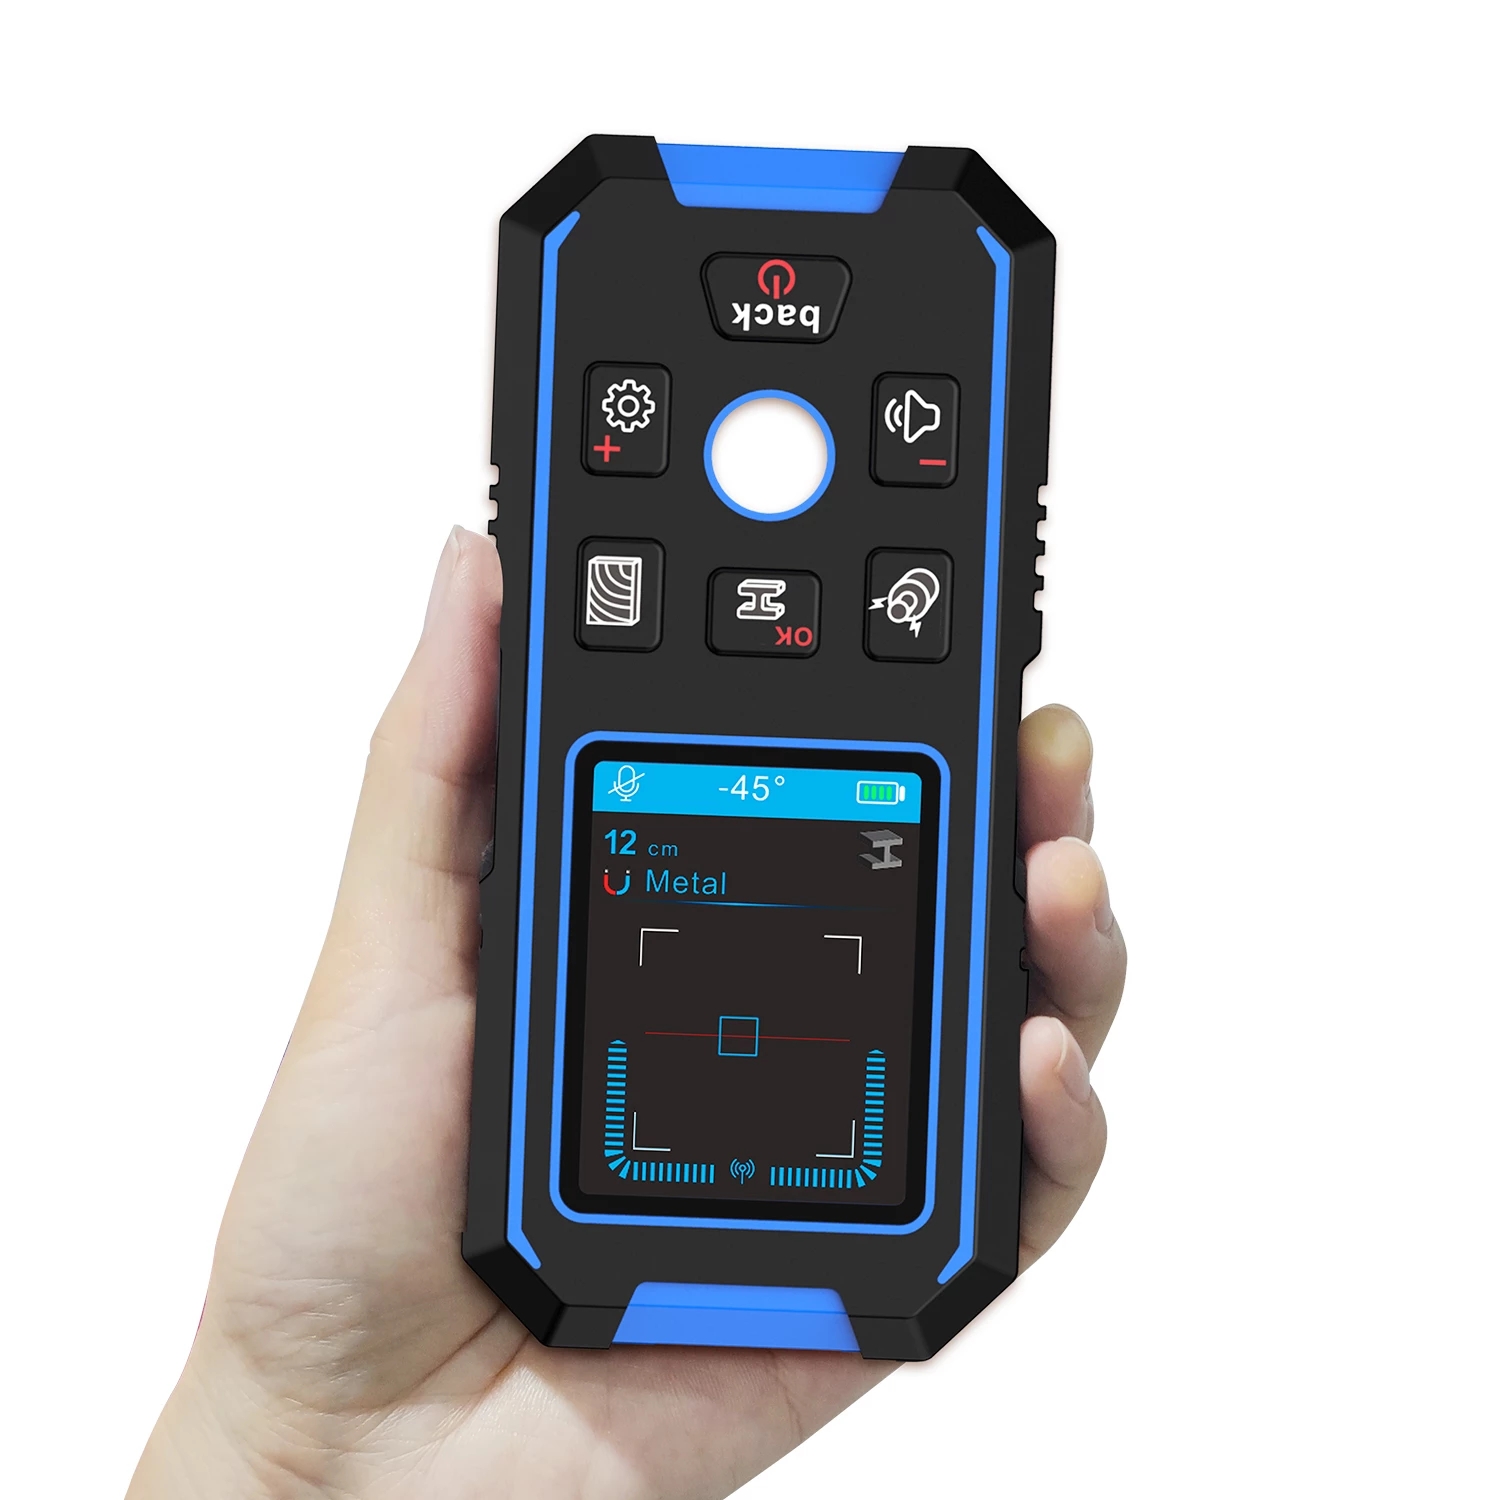 Find NOYAFA NF 518 LCD HD Display Metal Tester Wood Finder AC Cable Wires Depth Tracker Wall Scanner for Sale on Gipsybee.com with cryptocurrencies